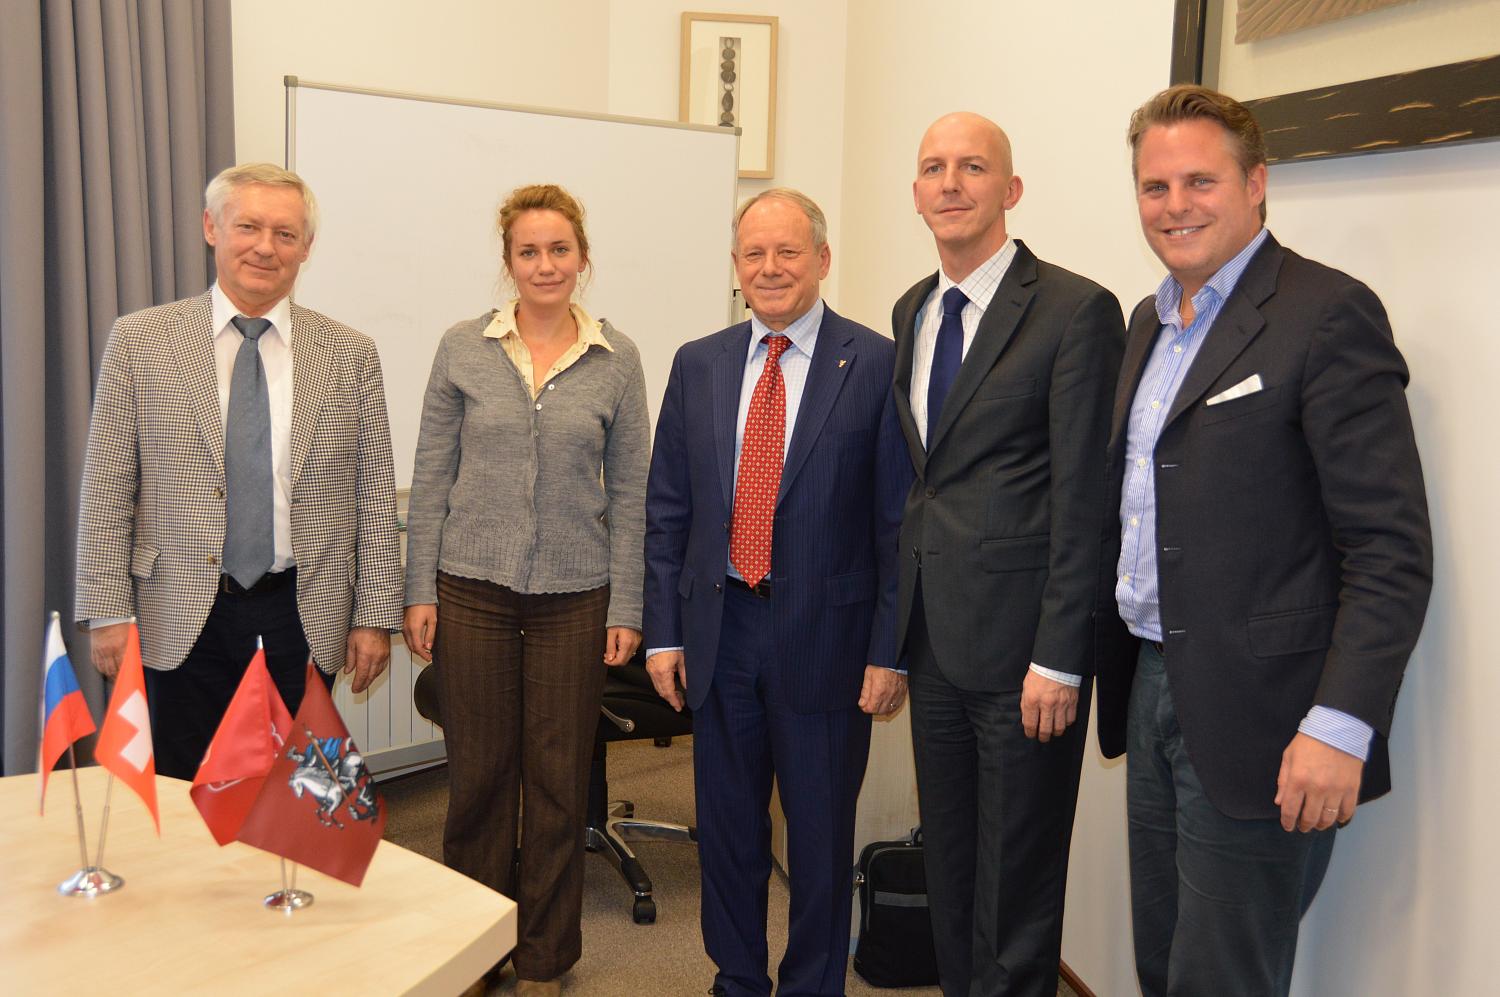 The Chamber of Commerce of the Swiss canton of Geneva is interested in collaboration with MCCI